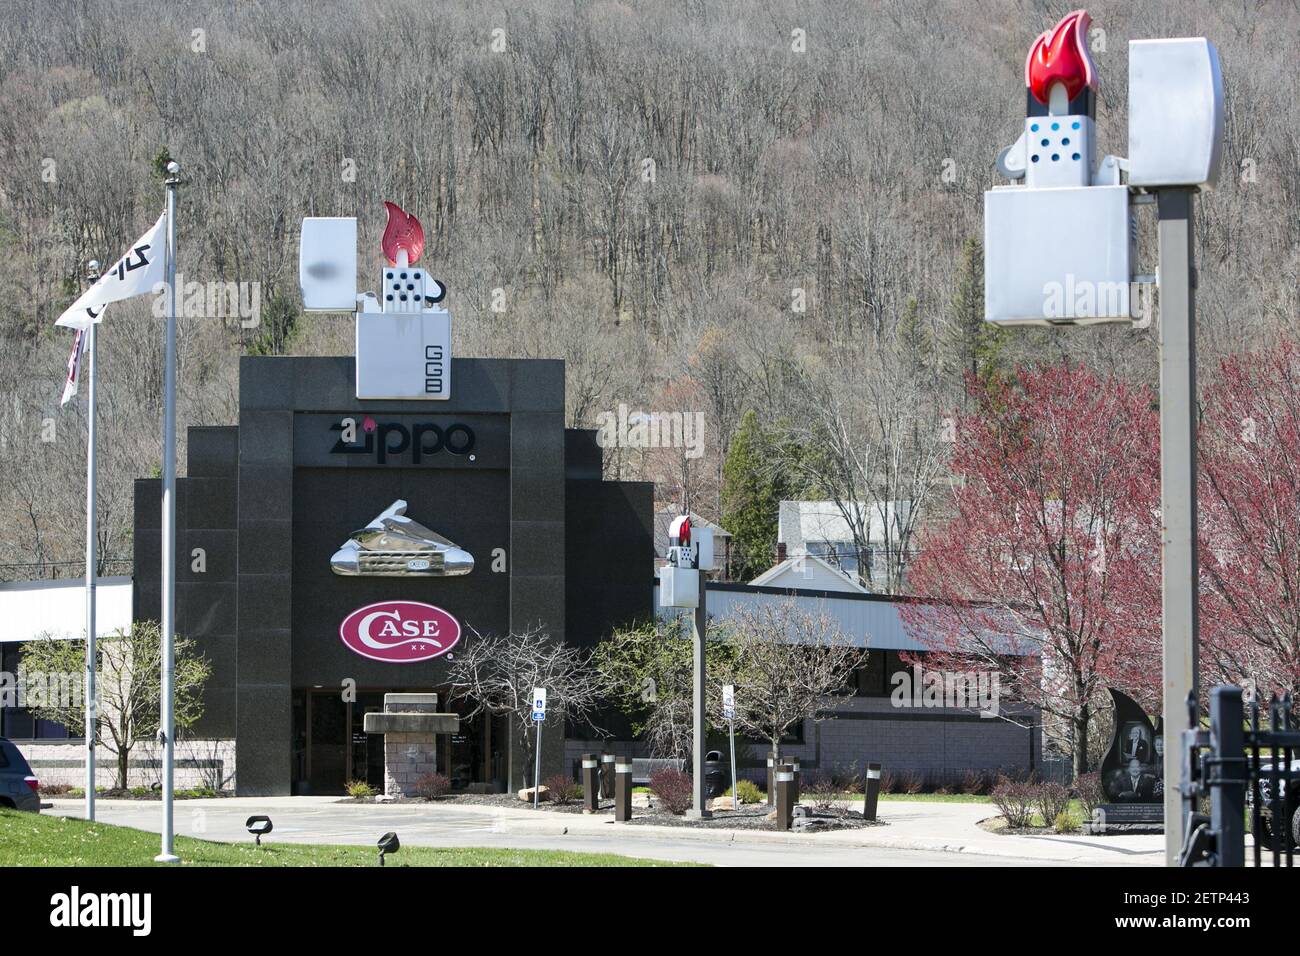 A logo sign outside of the Zippo/Case visitors center of the Zippo  Manufacturing Company, maker of Zippo lighters, in Bradford, Pennsylvania  on April 14, 2017. Photo by Kristoffer Tripplaar *** Please Use